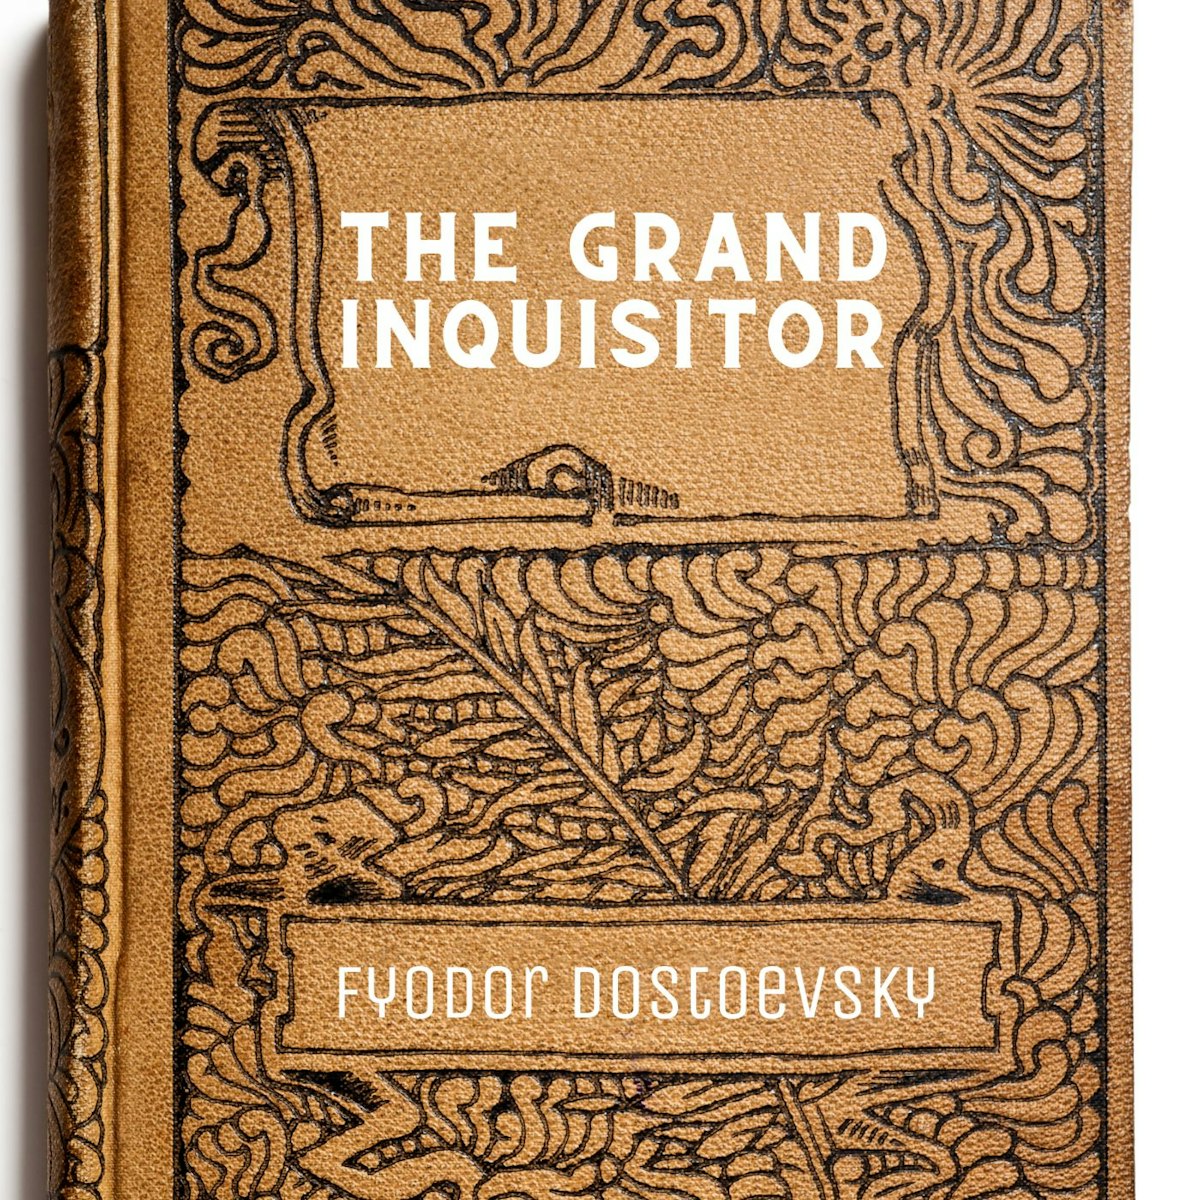 featured image - The Grand Inquisitor by Fyodor Dostoyevsky - Table of Links